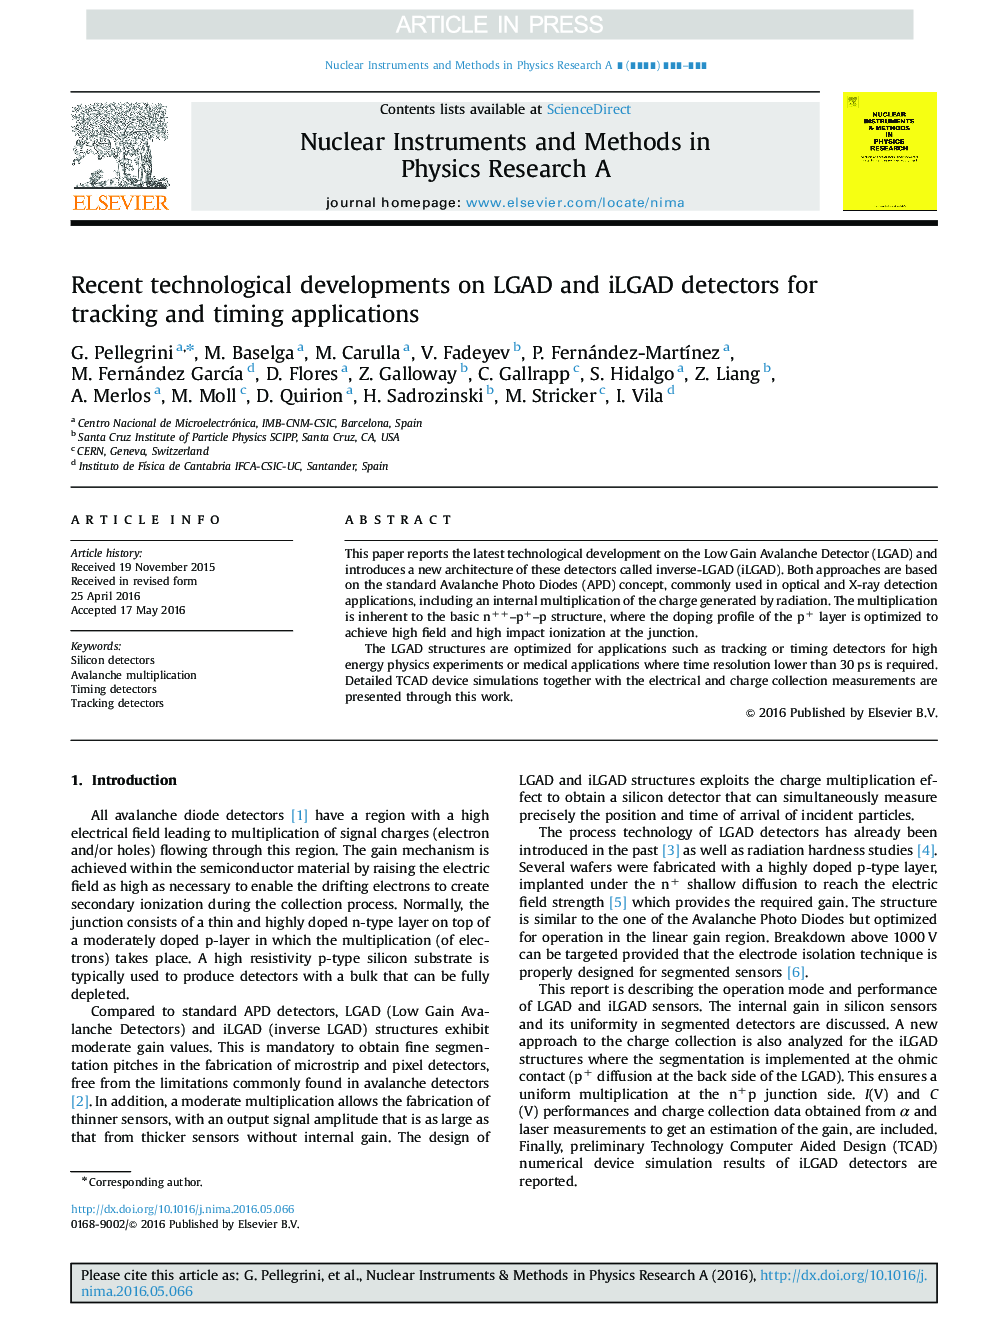 Recent technological developments on LGAD and iLGAD detectors for tracking and timing applications